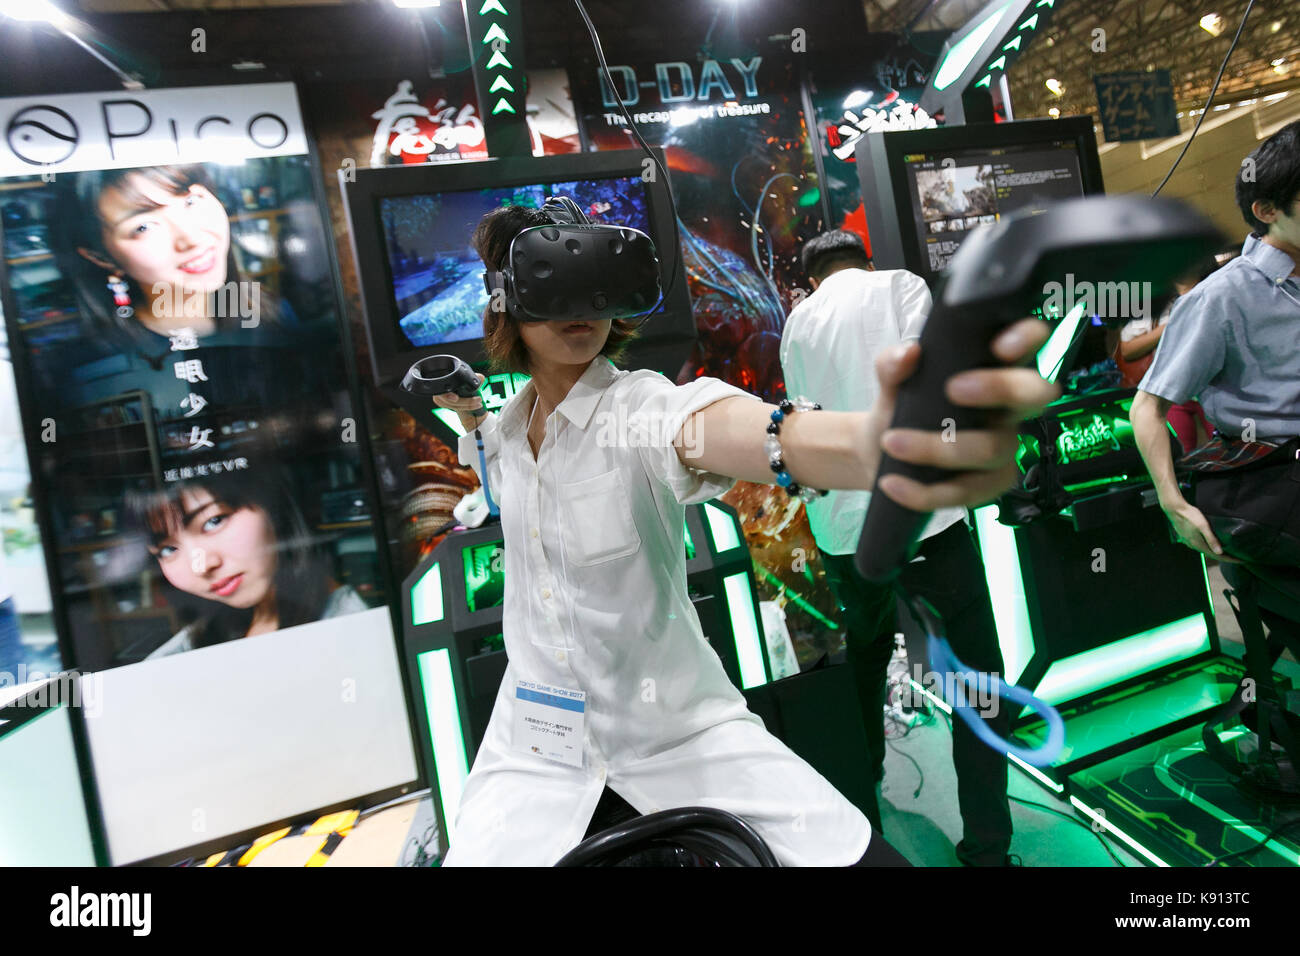 Chiba, Japan. 21st Sep, 2017. A woman tests a virtual reality glasses at the Tokyo Game Show (TGS 2017) on September 21, 2017, Chiba, Japan. This year's event hosts 609 companies from 36 different countries, introducing 1,317 video game titles for smartphones, games consoles, VR, AR and MR platforms. The show, which expects to attract 250,000 visitors, runs until September 24 at the International Convention Complex Makuhari Messe in Chiba; and will be streamed live around the world. Credit: Rodrigo Reyes Marin/AFLO/Alamy Live News Stock Photo